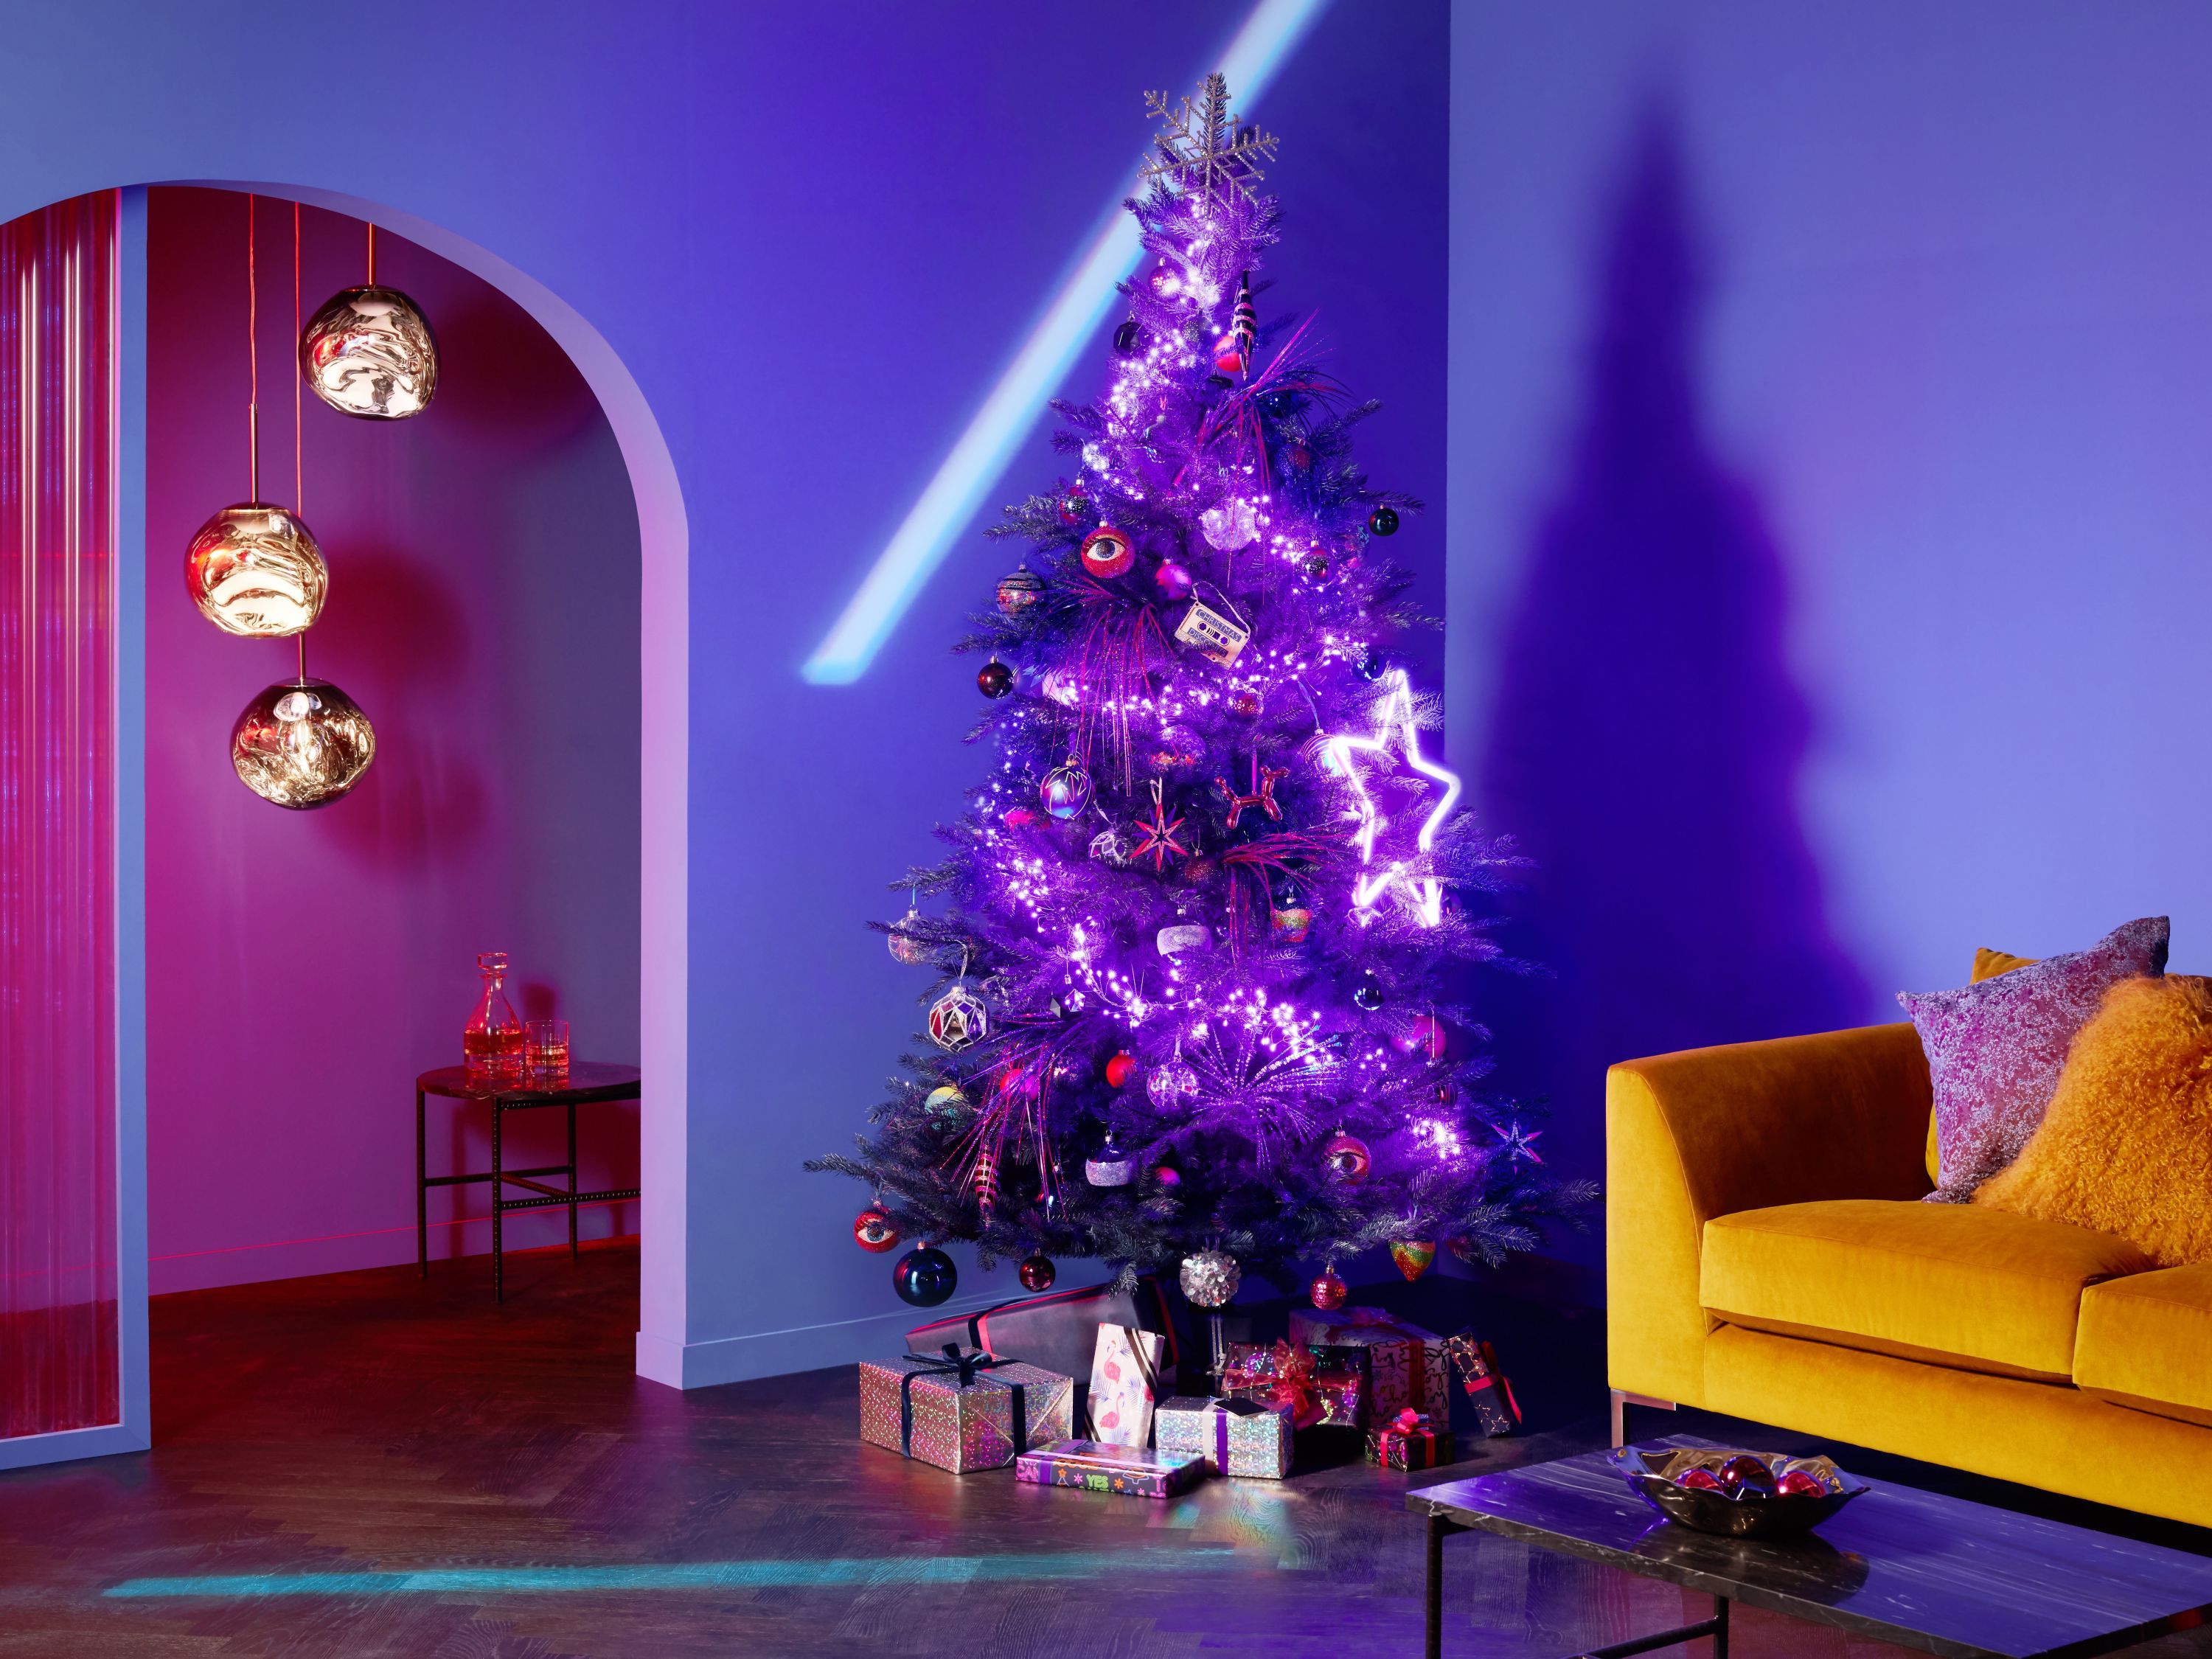 80s 90s Themed Party Tree Is Top Christmas 2019 Decorating Trend